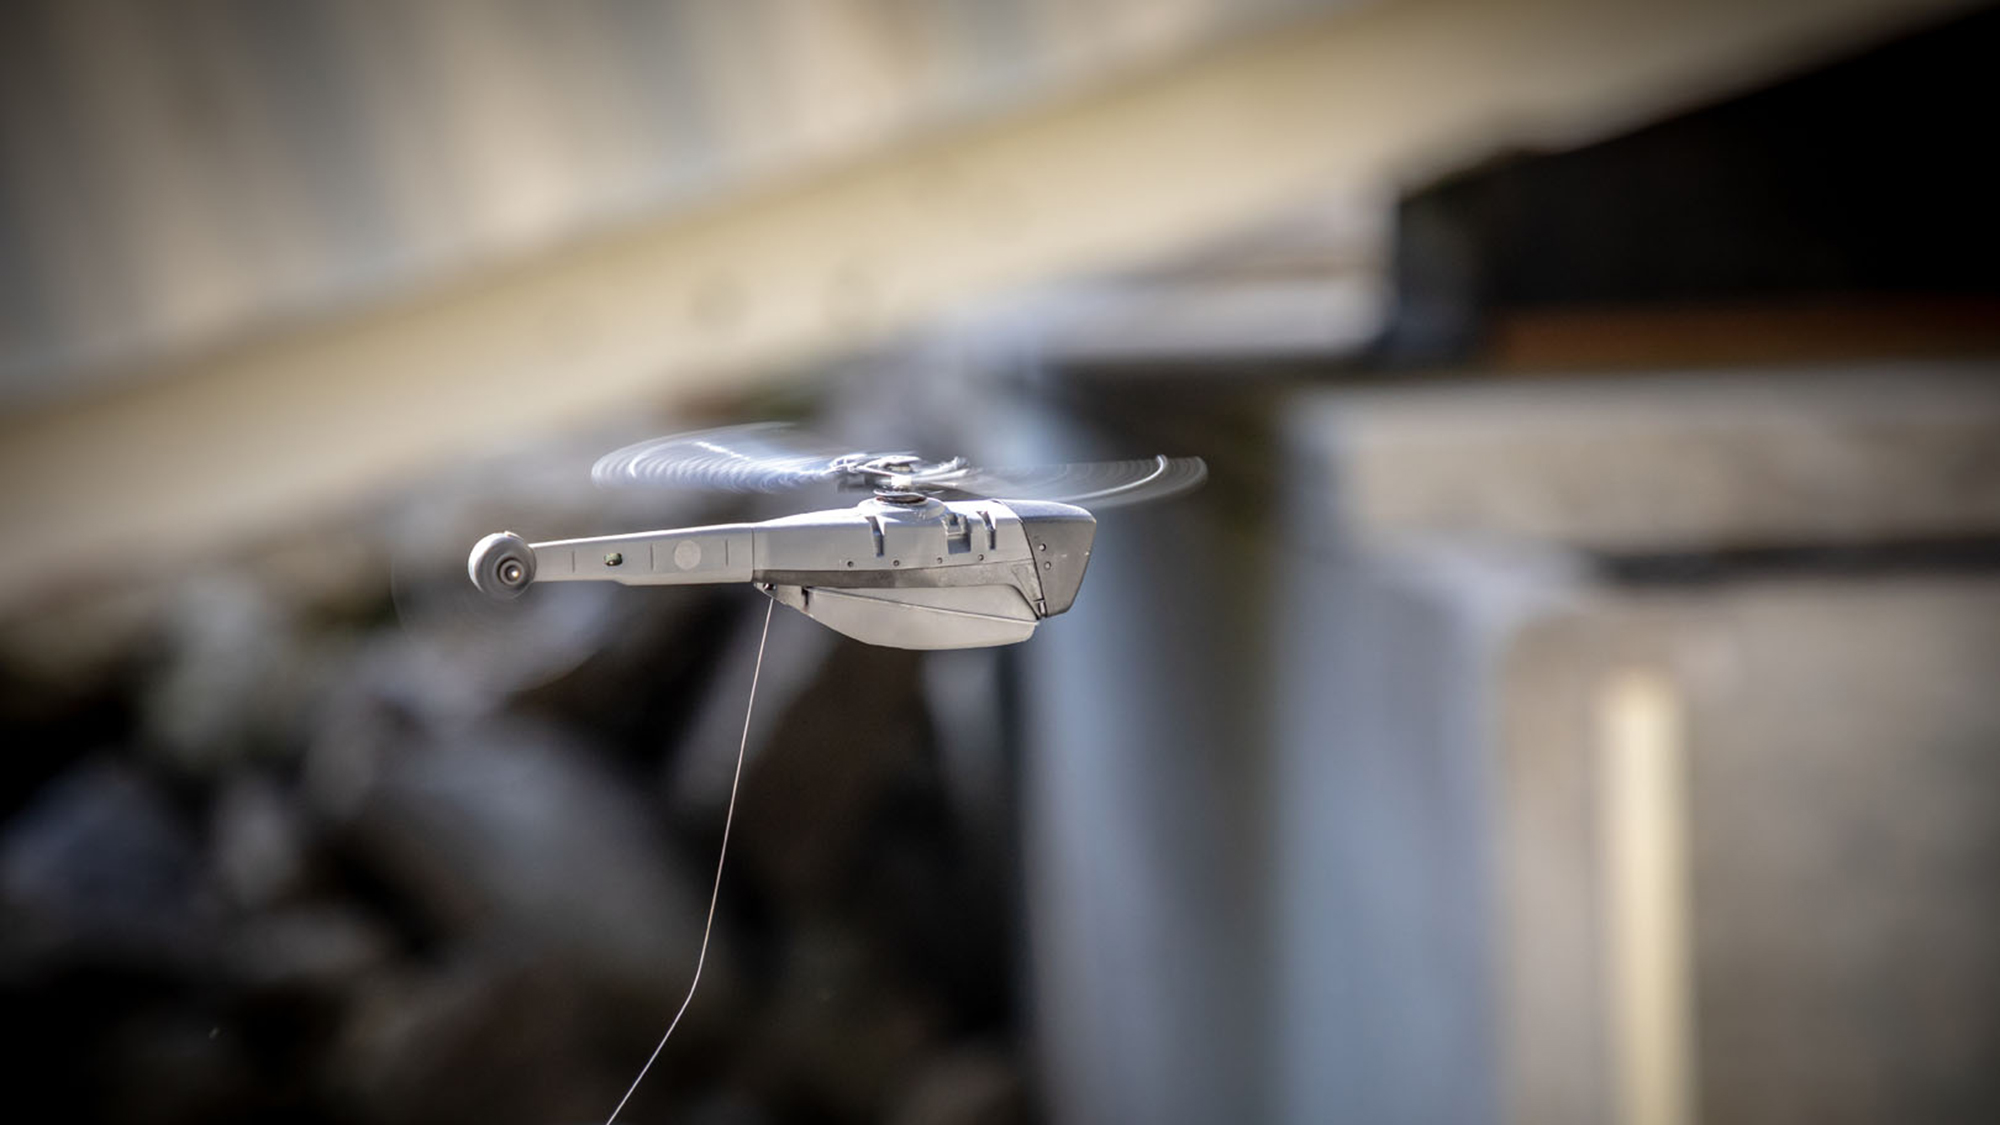 The US military’s tiniest drone feels like it flew straight out of a sci-fi film